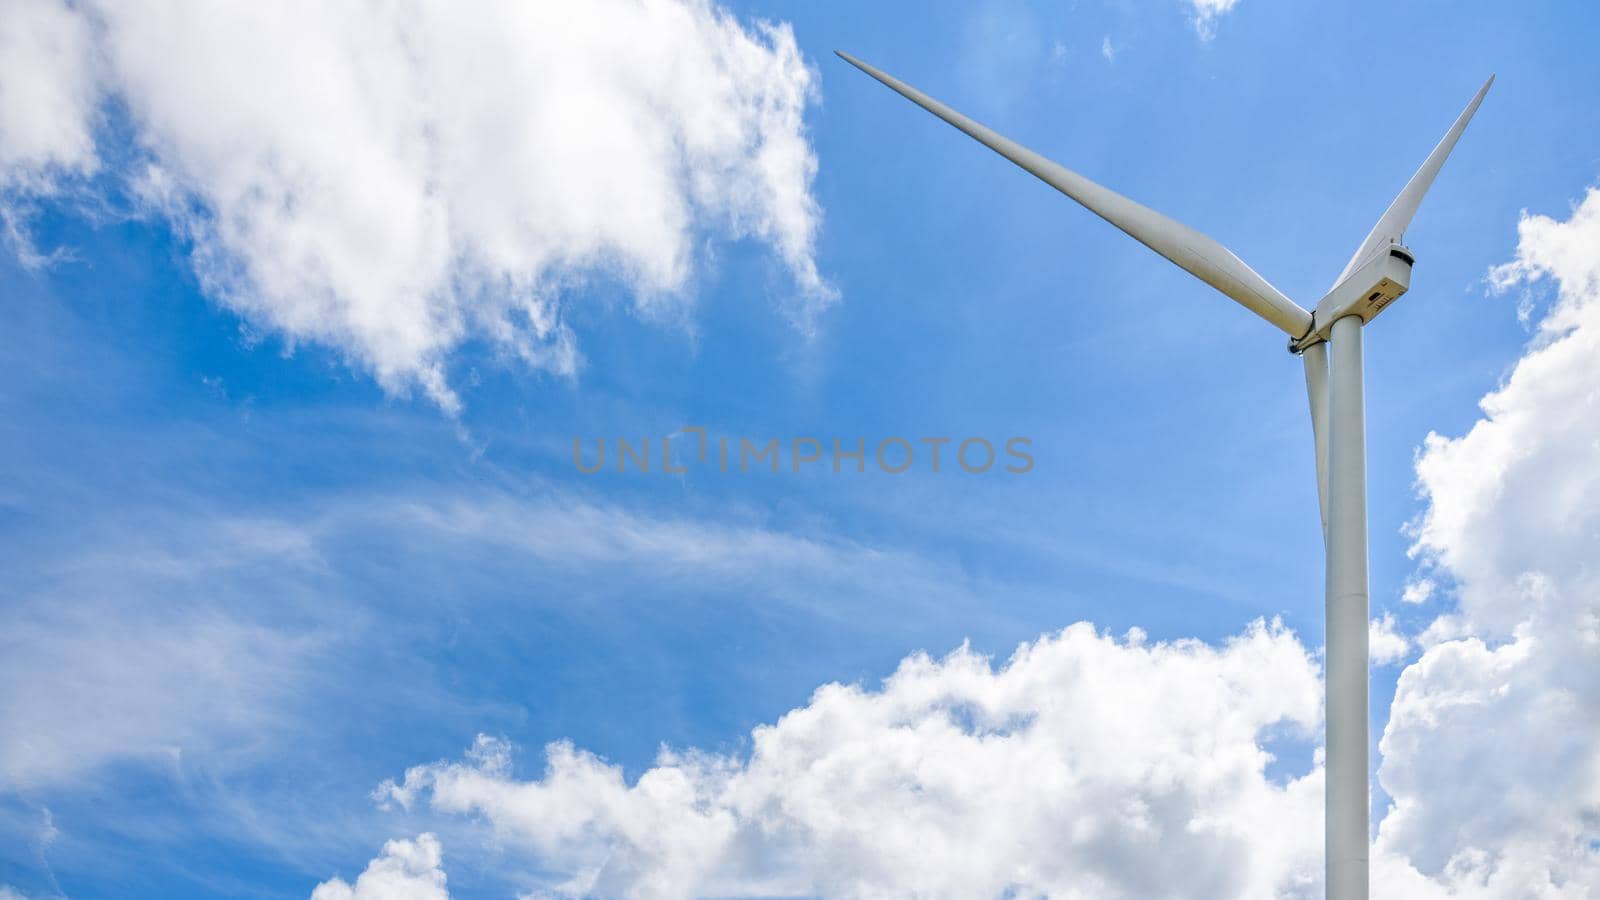 Beautiful wind turbine on blue sky and white clouds background, Eco-friendly electric power source help reduce global warming, 16:9 wide screen